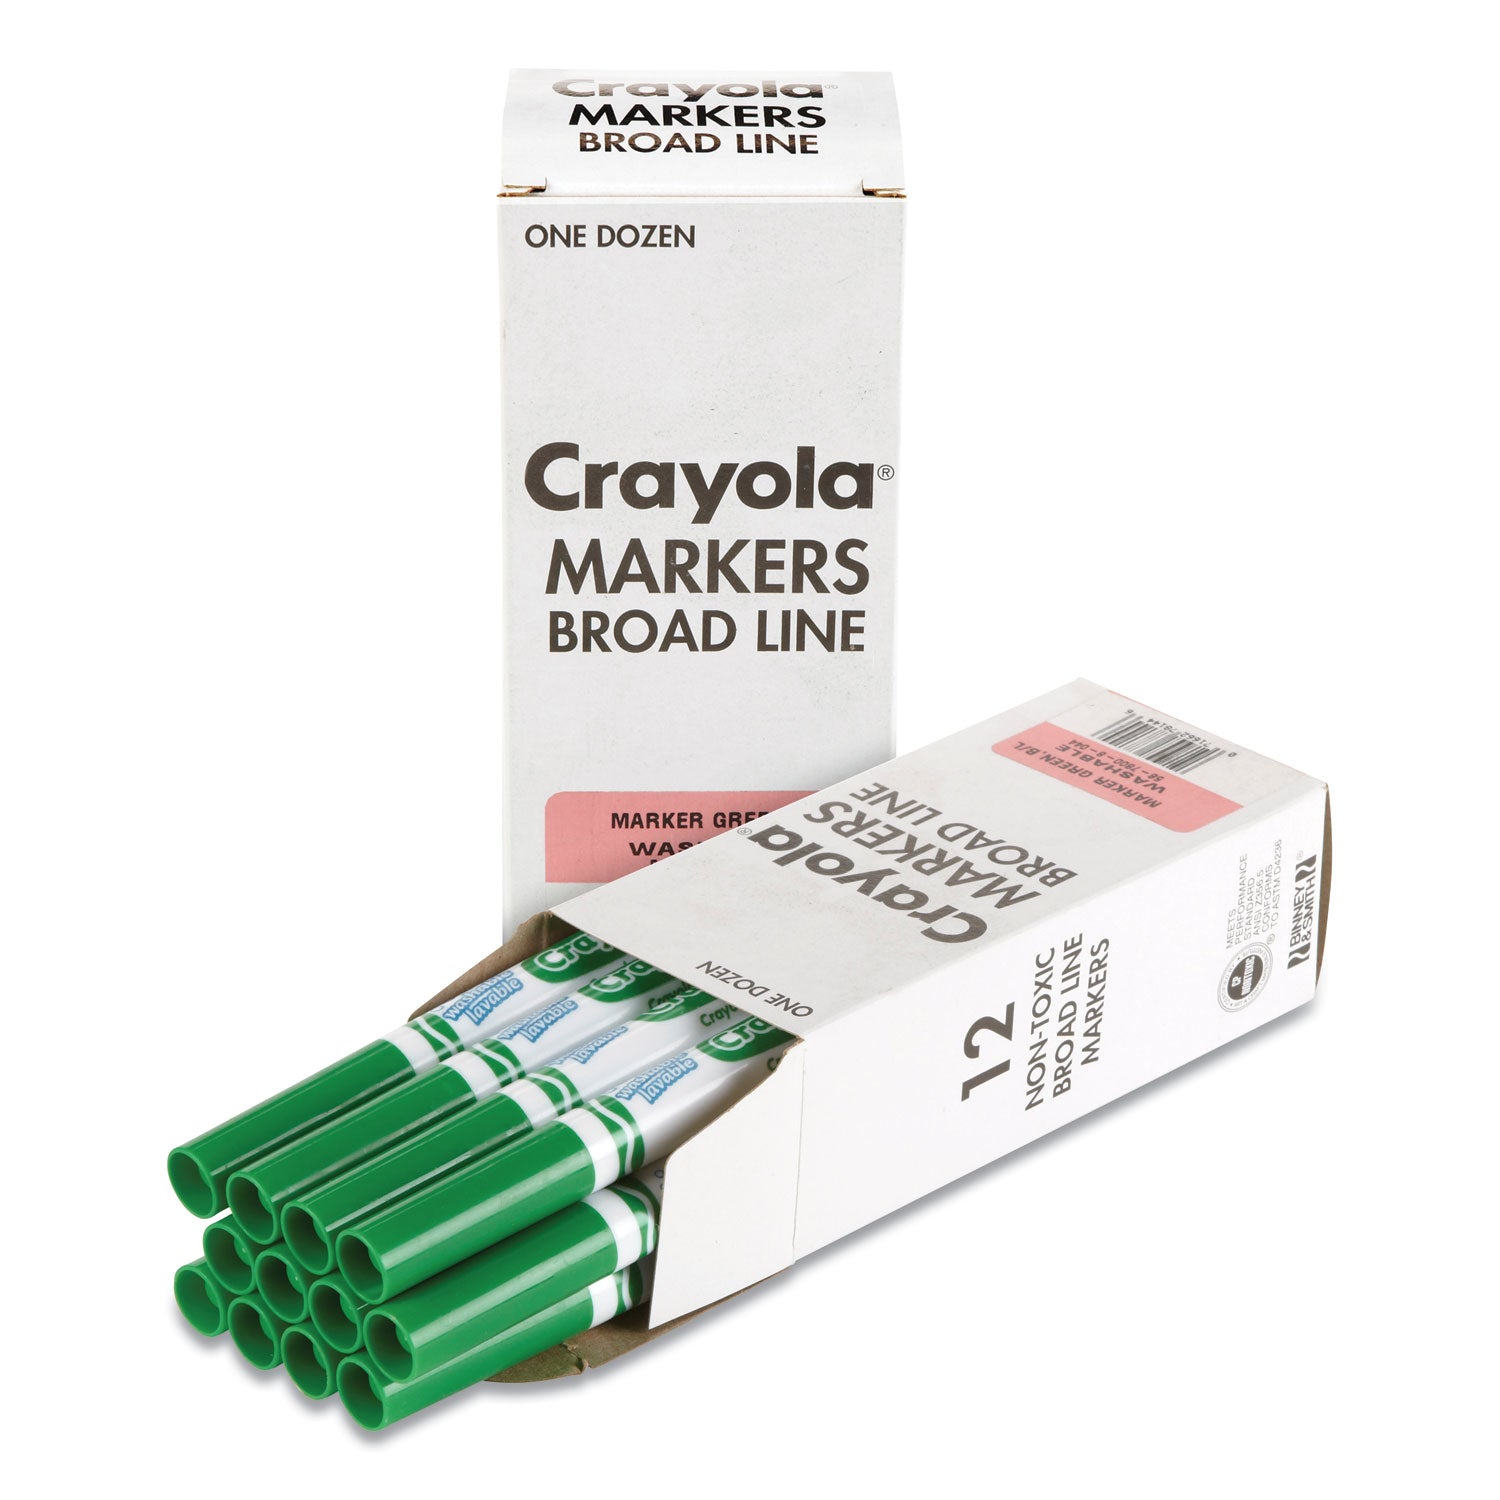 broad-line-washable-markers-broad-bullet-tip-green-12-box_cyo587800044 - 3